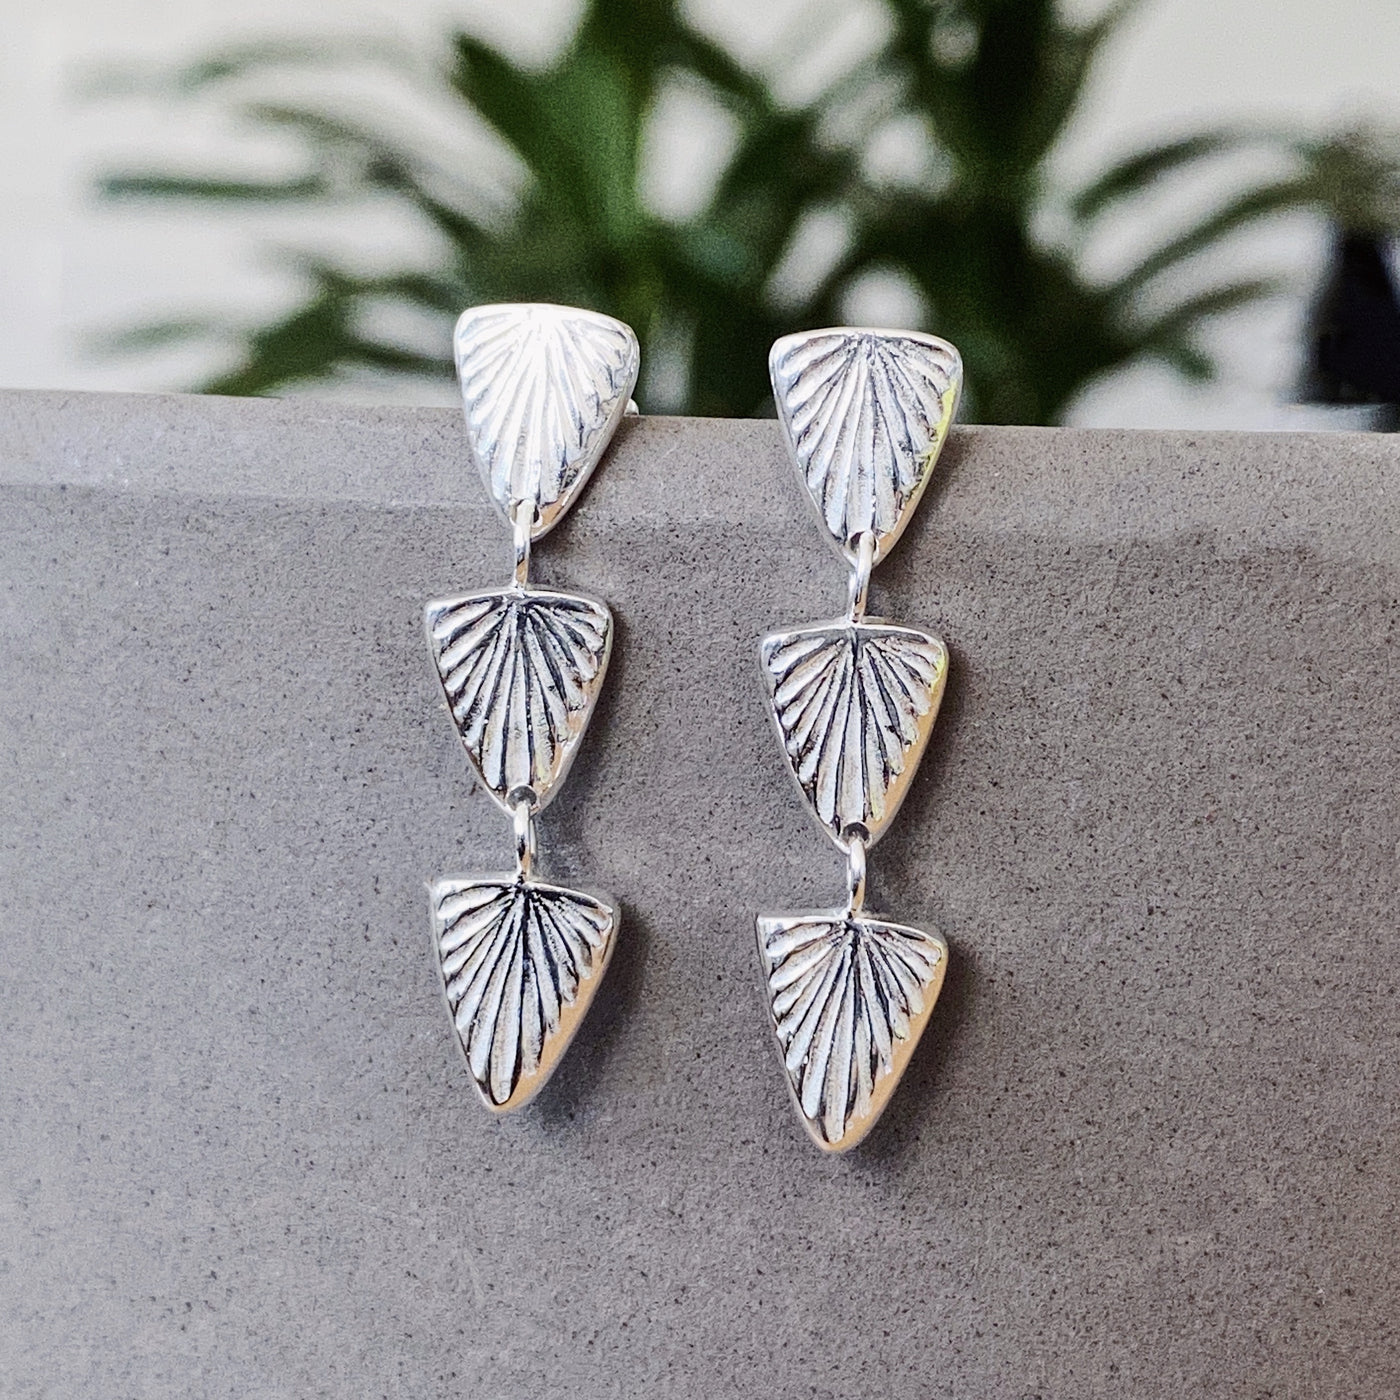 Sterling silver triple drop earrings of cared triangular sparks with post backs in natural light by Corey Egan